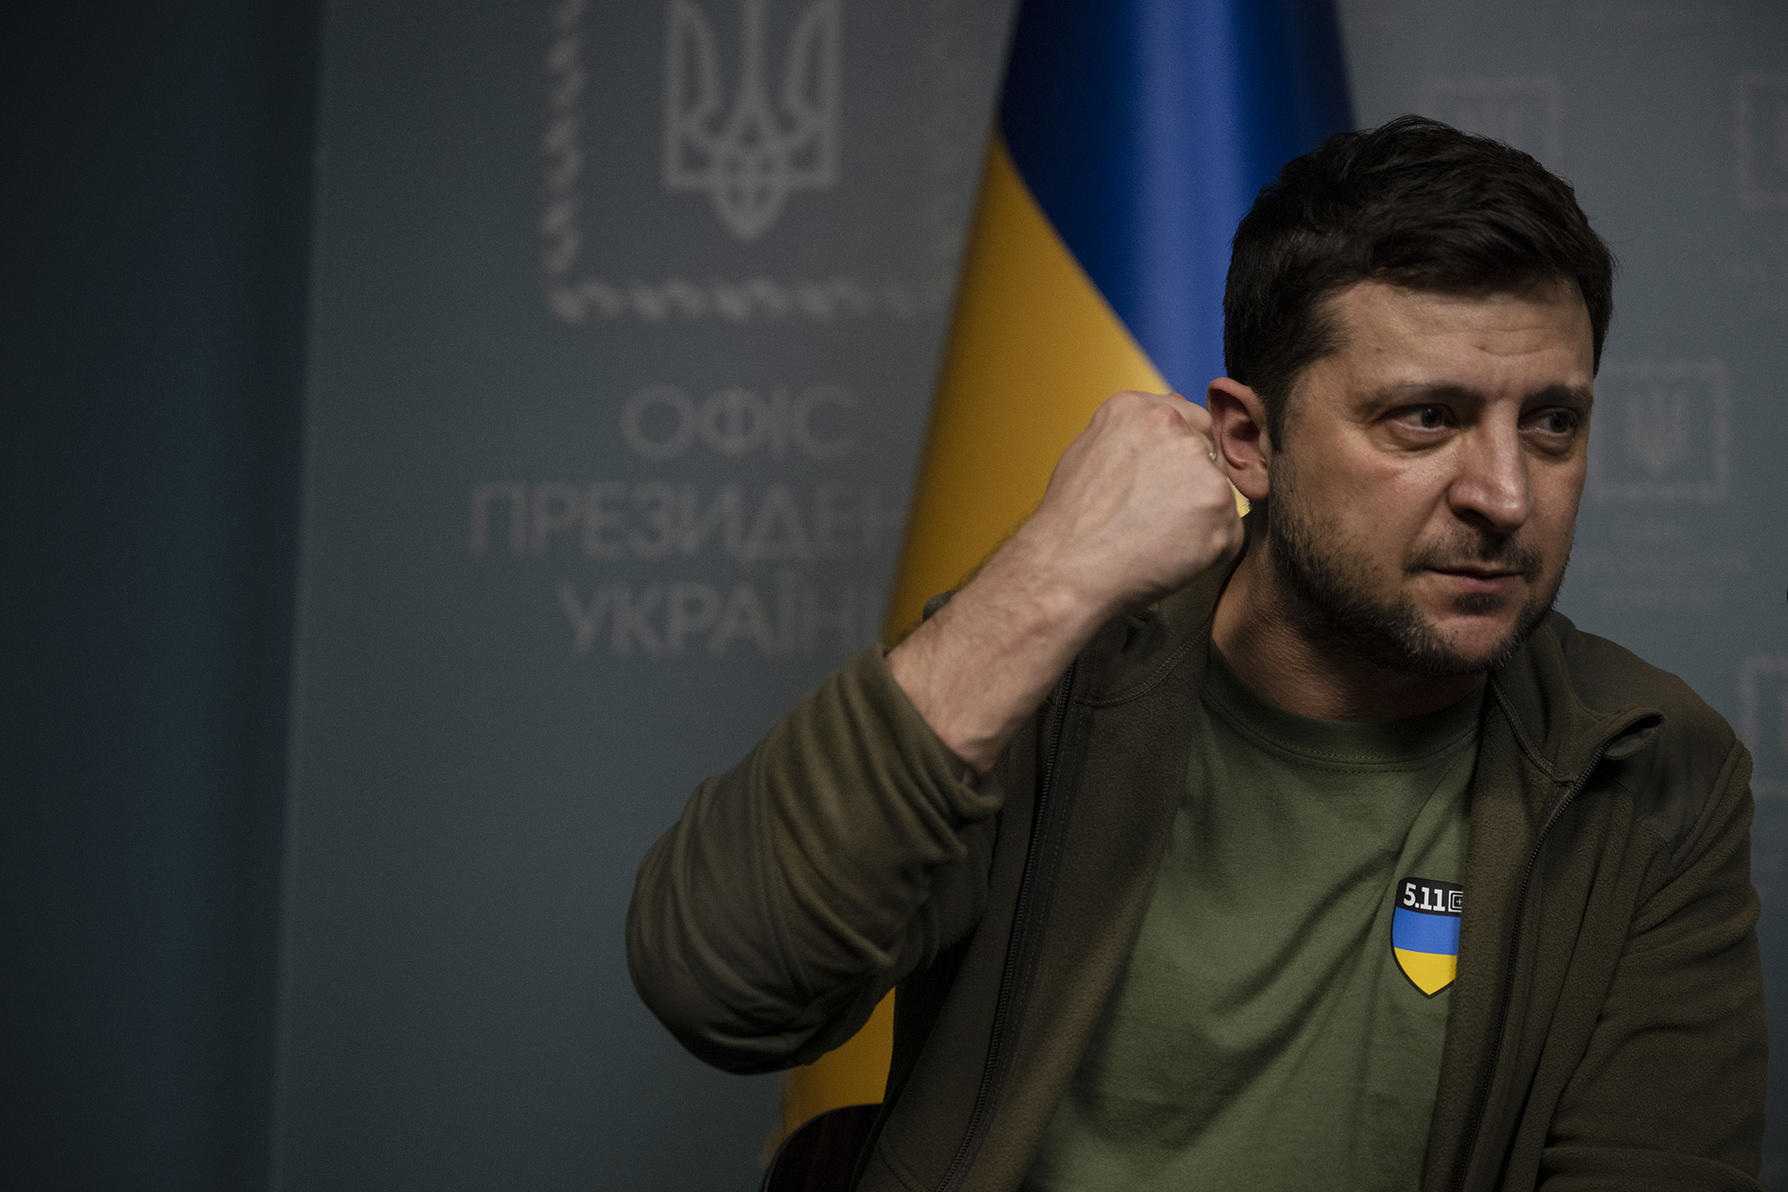 President Volodymyr Zelenskyy of Ukraine during a news conference in Kyiv, March 3, 2022. (Lynsey Addario/The New York Times)